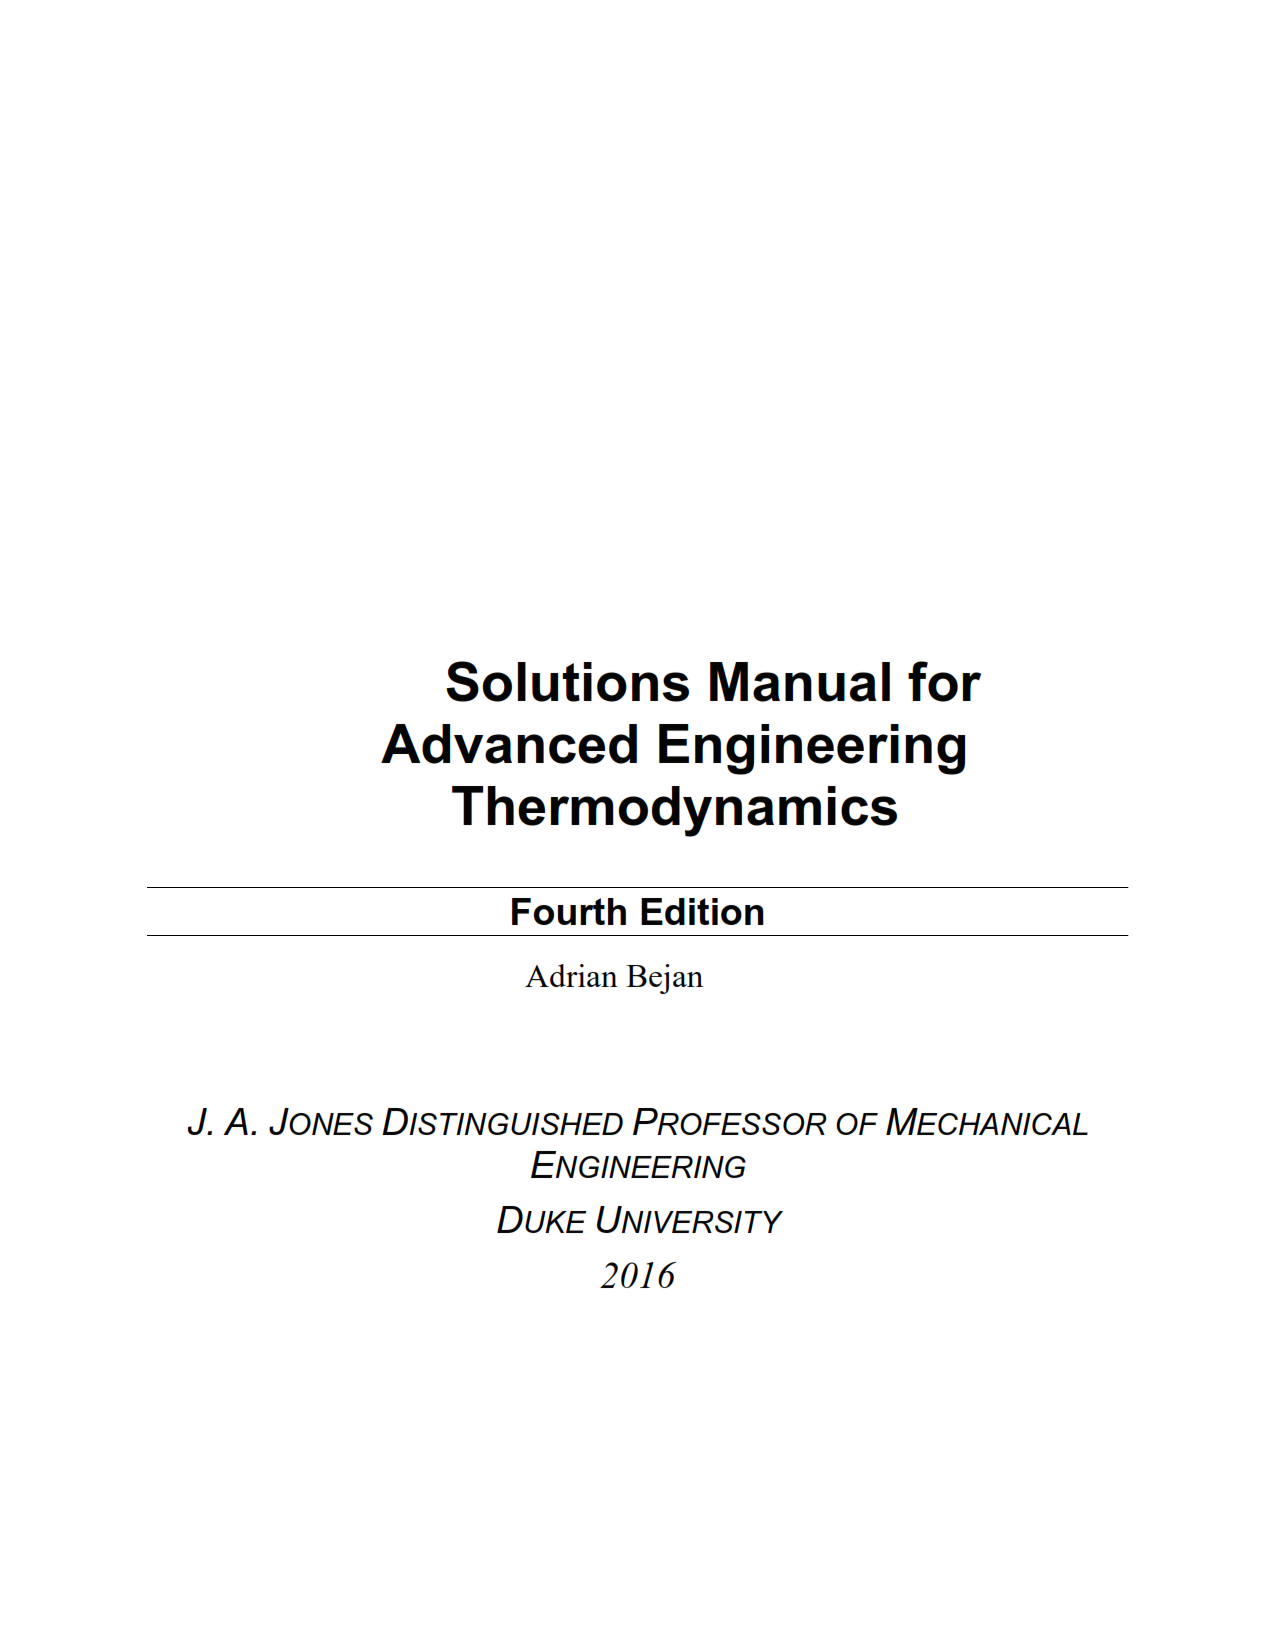 Download free advanced engineering thermodynamics 4th - 3rd edition by Adrian Bejan solution manual pdf | Gioumeh solutions